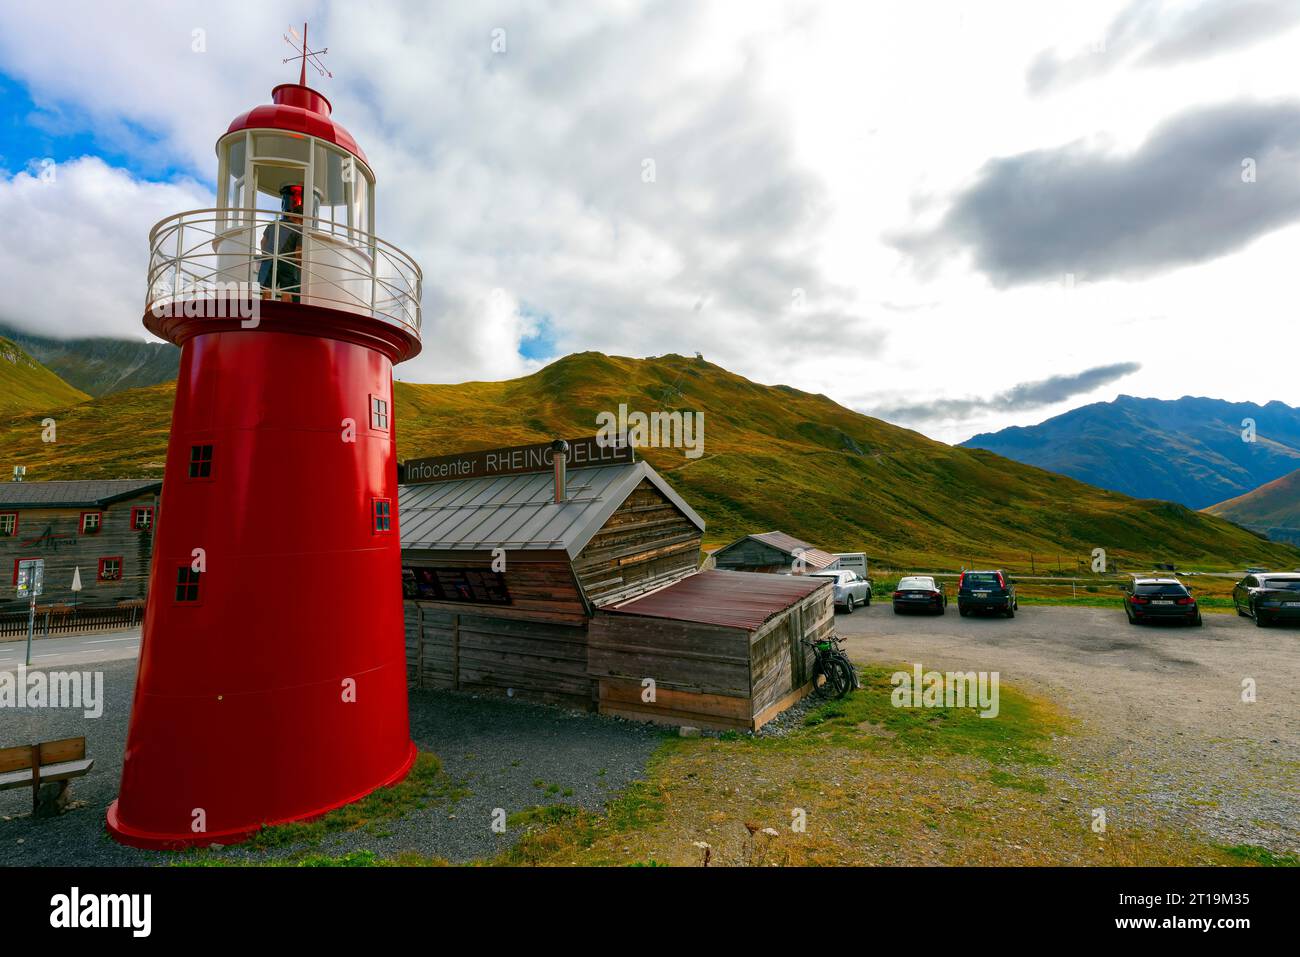 The lighthouse at Oberalppass, altitude 2046 m. The Pass is an important route through the Alps, connecting Switzerland and Italy. Stock Photo